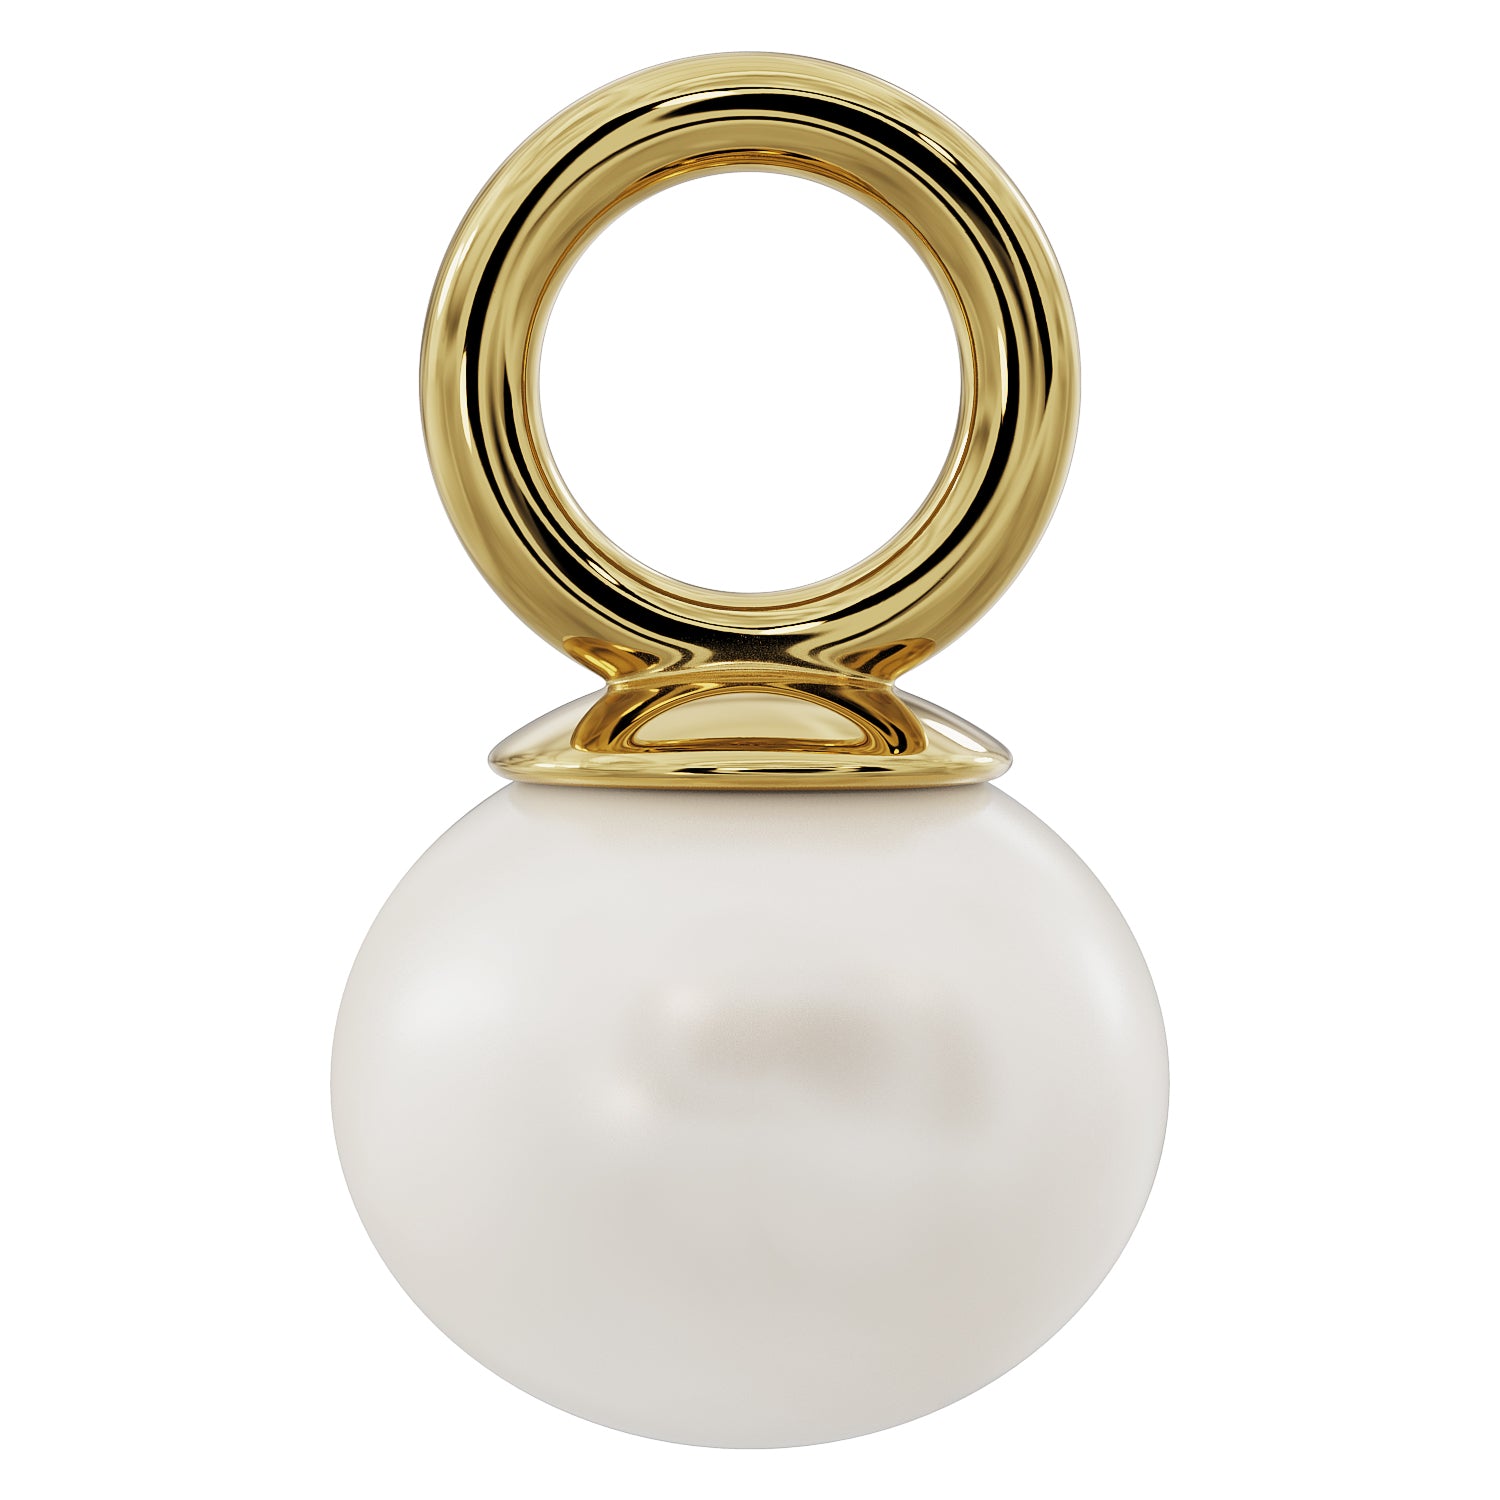 Cultured Freshwater Pearl Charm Accessory for Piercing Jewelry